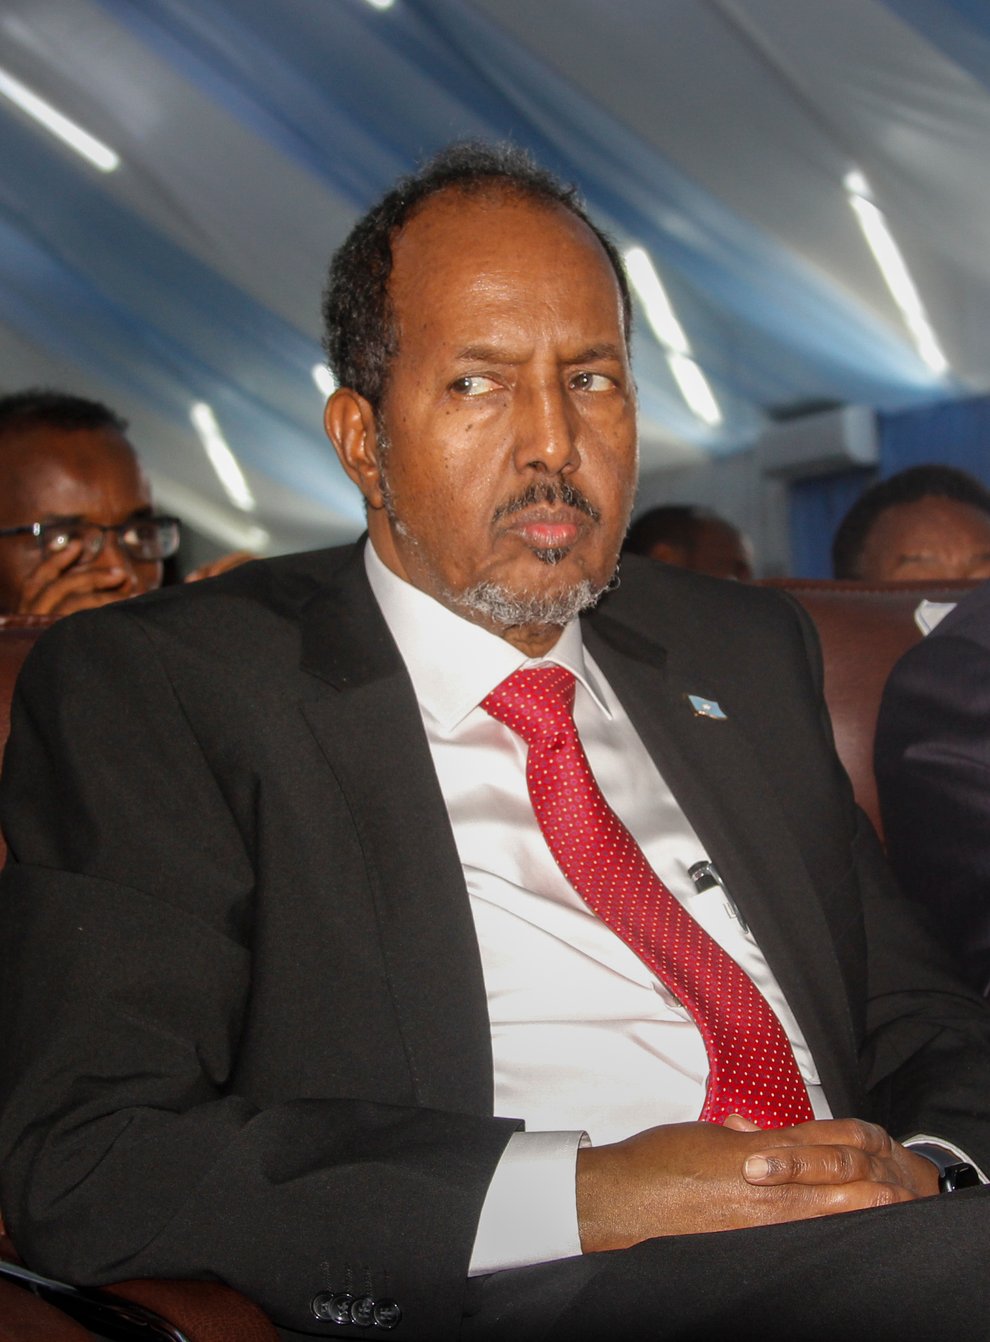 Former president Hassan Sheikh Mohamud, centre, has been re-elected (Farah Abdi Warsameh/AP)